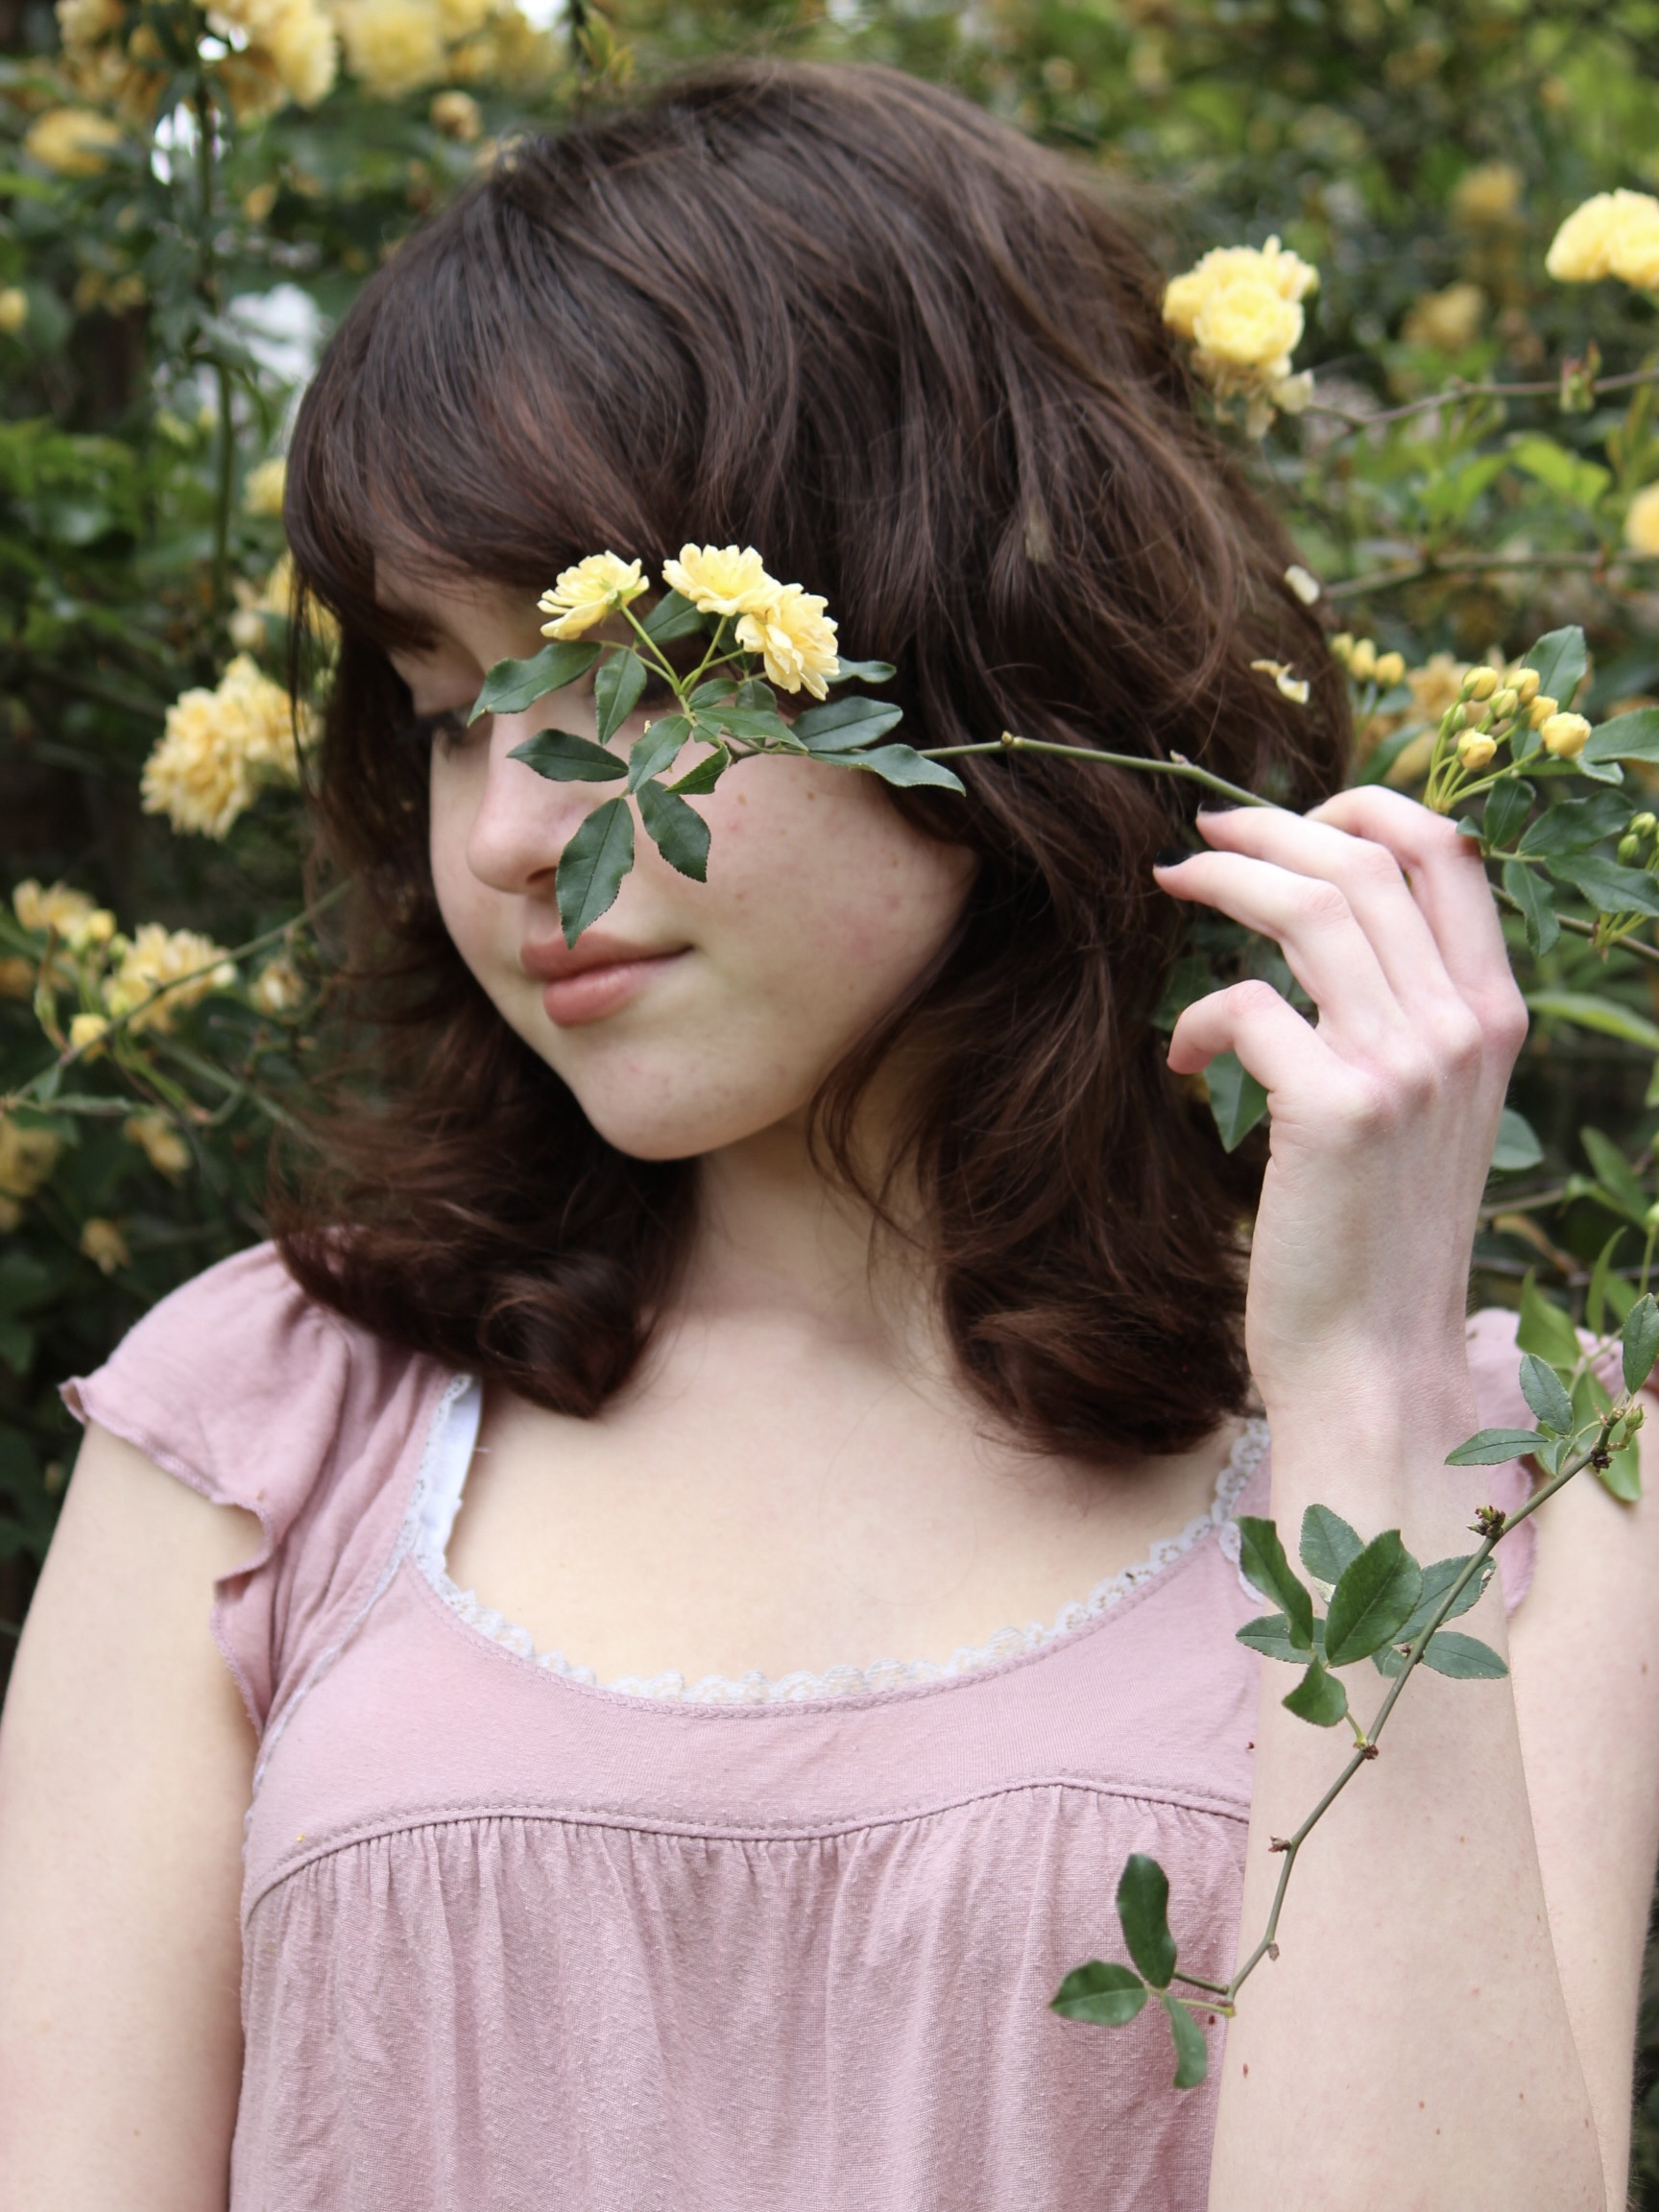 photo of a brown haired girl holding a flower in front of her face, partially hiding a smile